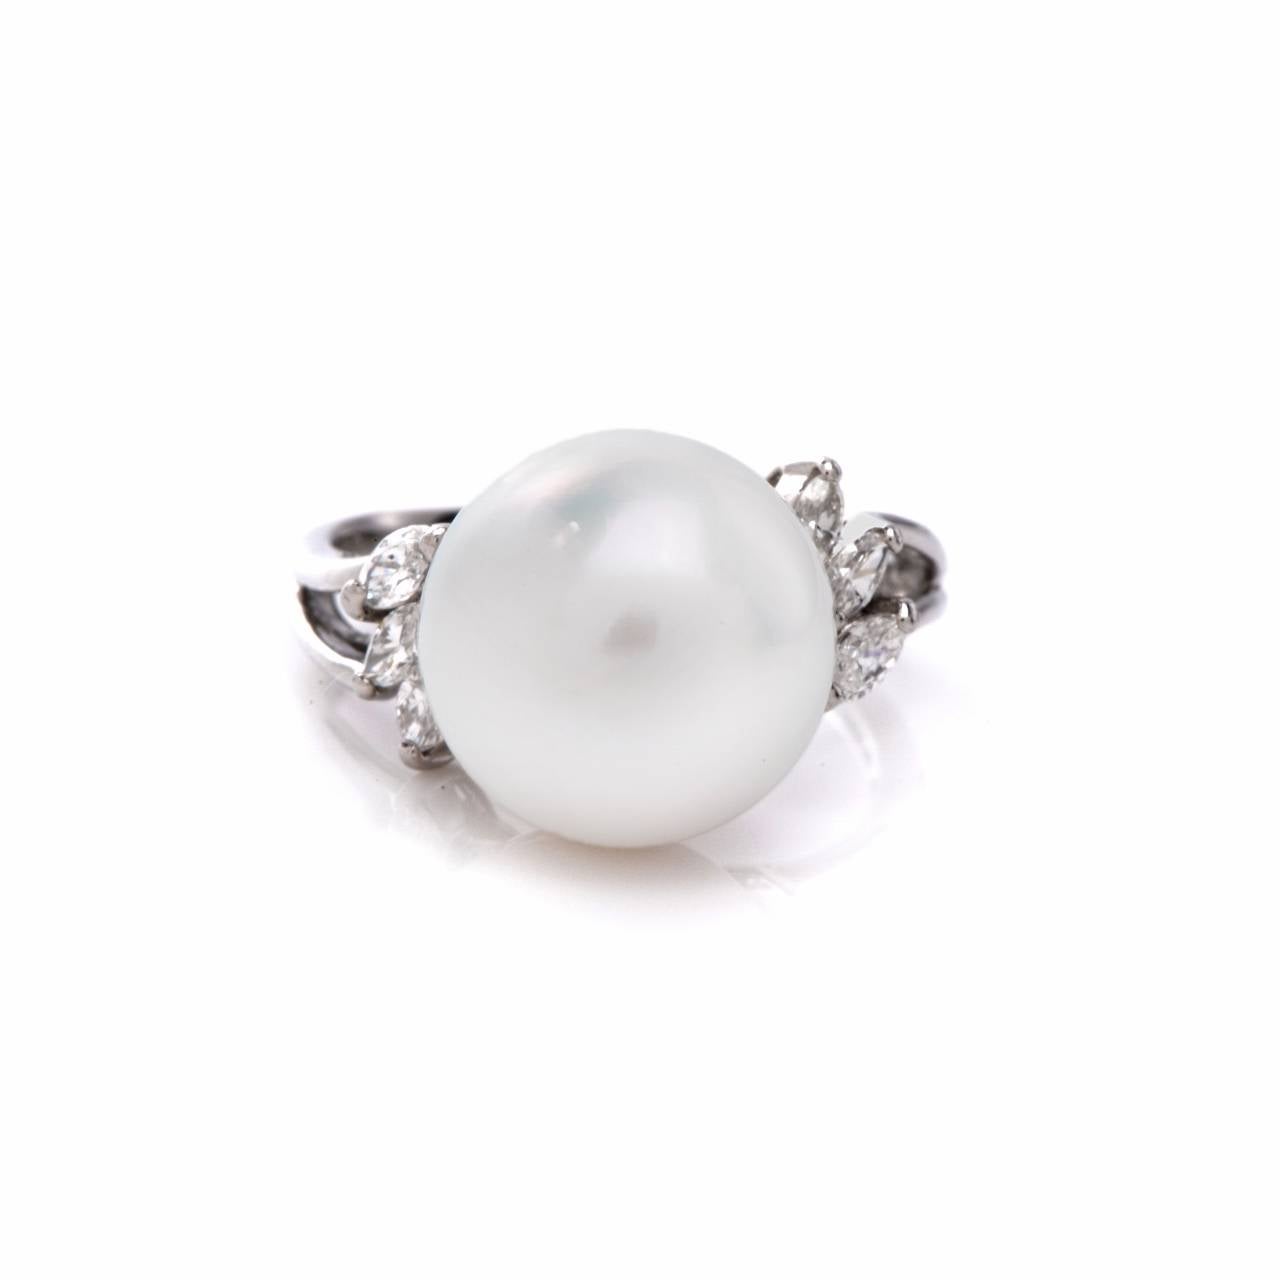 This classically distinct cocktail ring is crafted in solid platinum, weighing 5.8 grams.  It exposes a lustrous 12 mm South Sea pearl of excellent nacre, flanked by trios of 'en diagonal' mounted marquise diamonds.  The latter weigh cumulatively